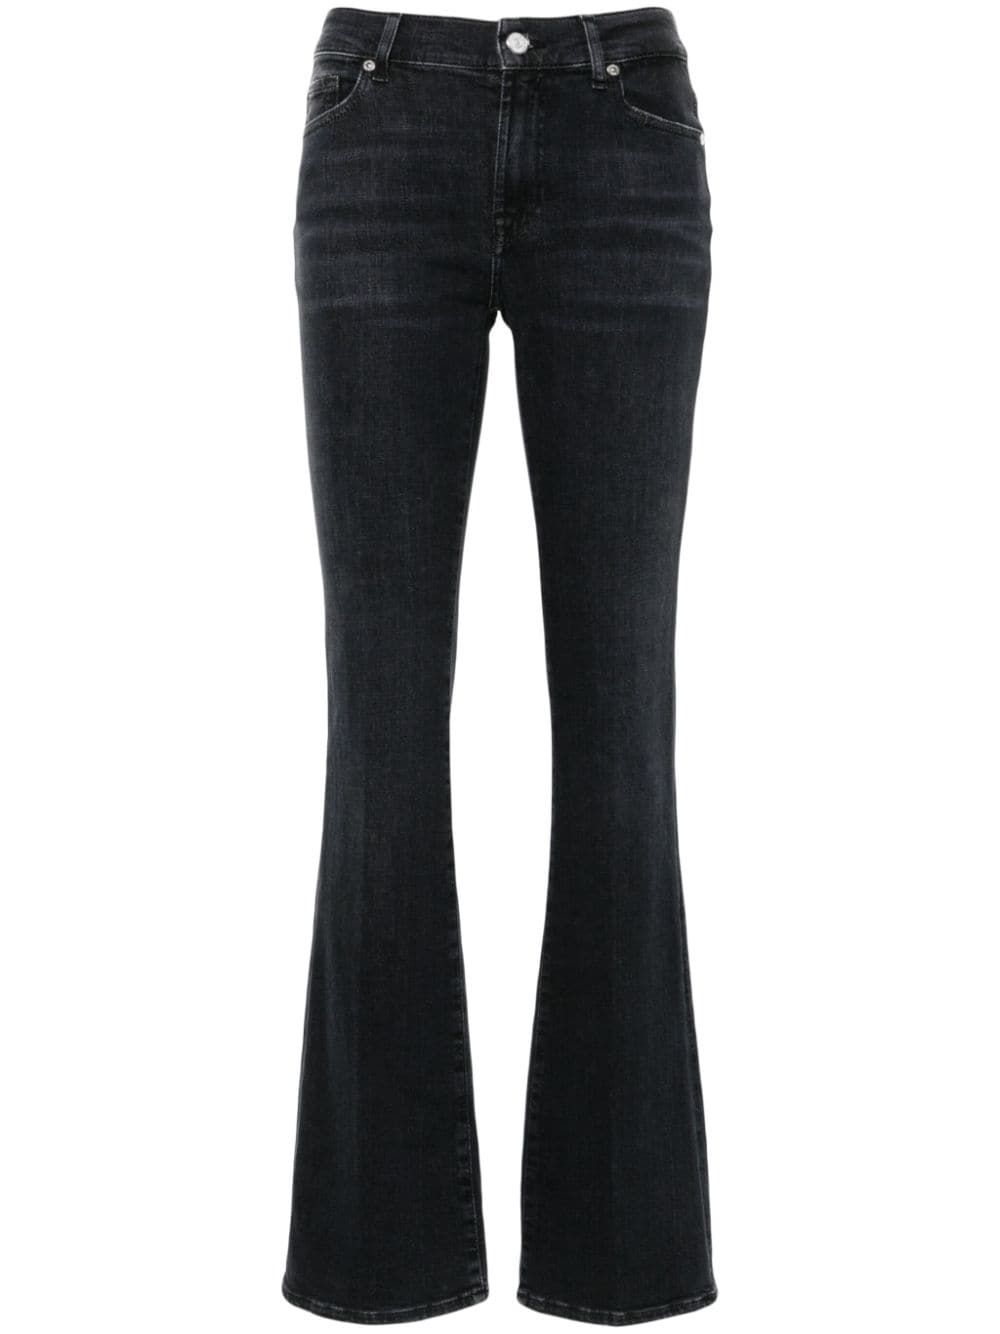 7 For All Mankind Illusion Space mid-rise bootcut jeans - Black von 7 For All Mankind